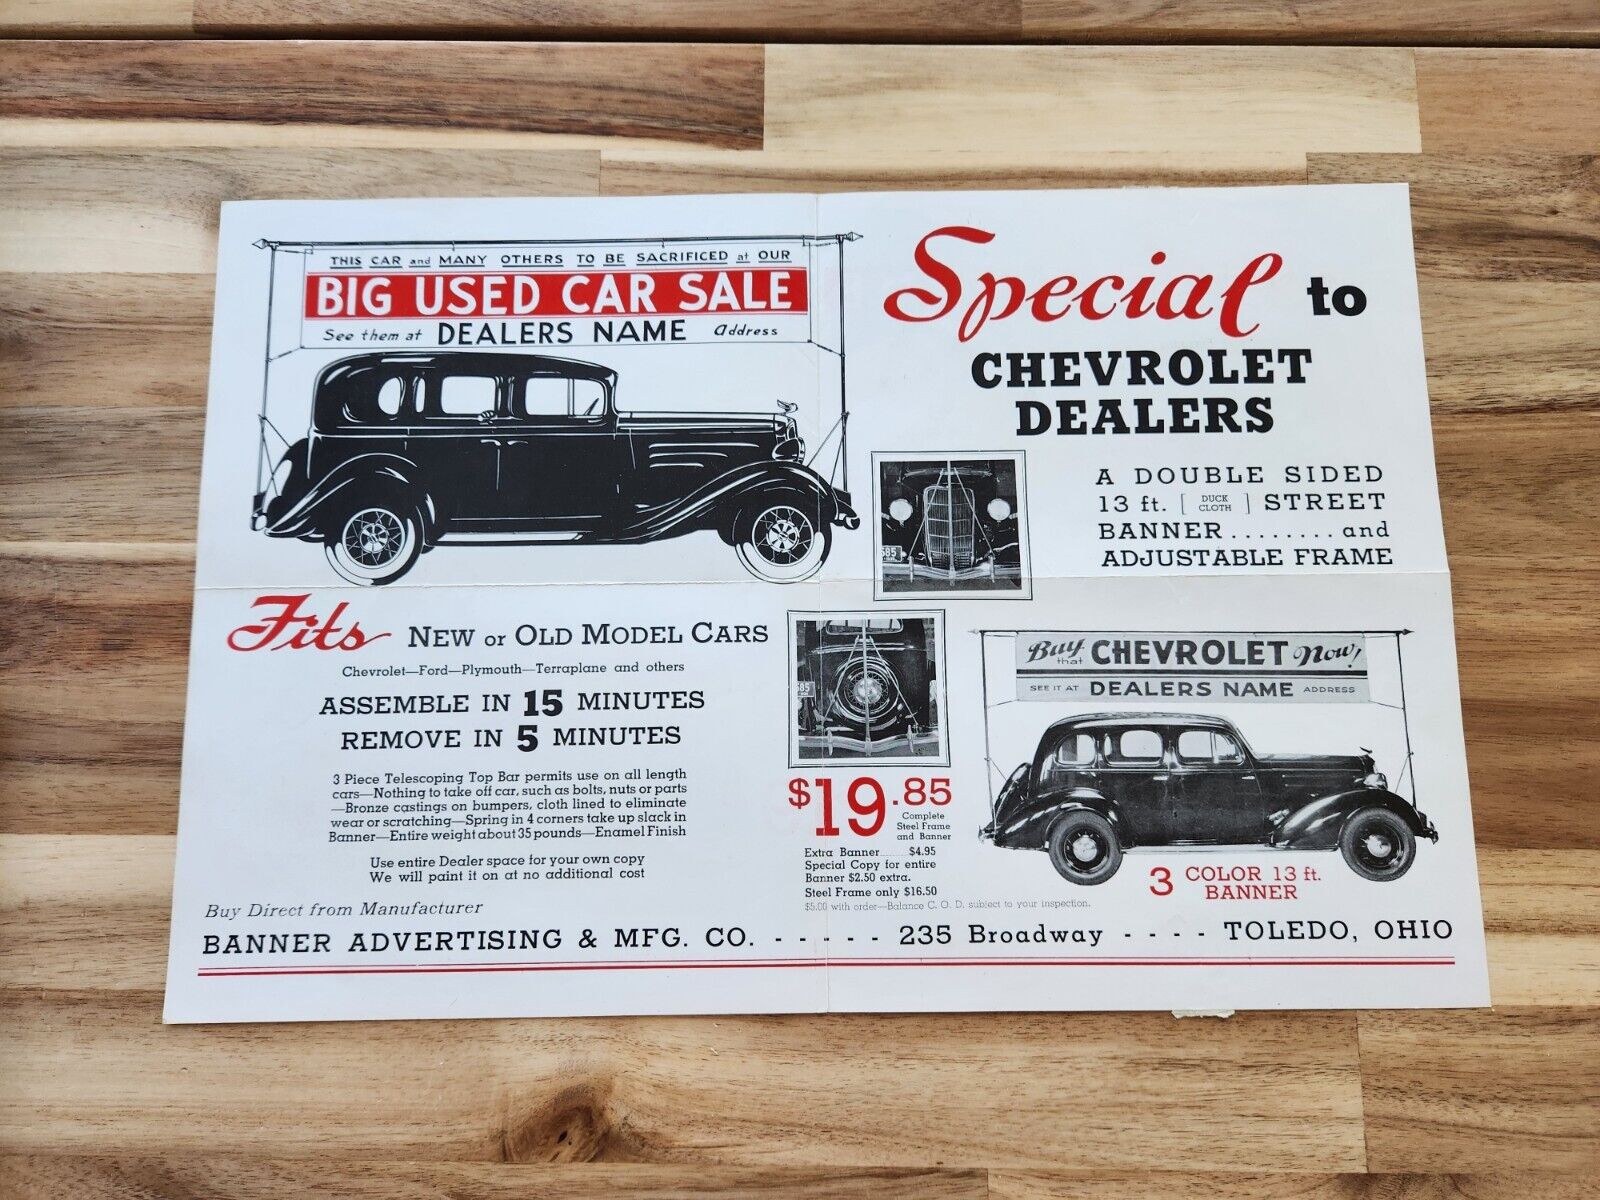 Original 1930s Chevrolet Special Flyer To Dealers, Banner Advertising For Cars